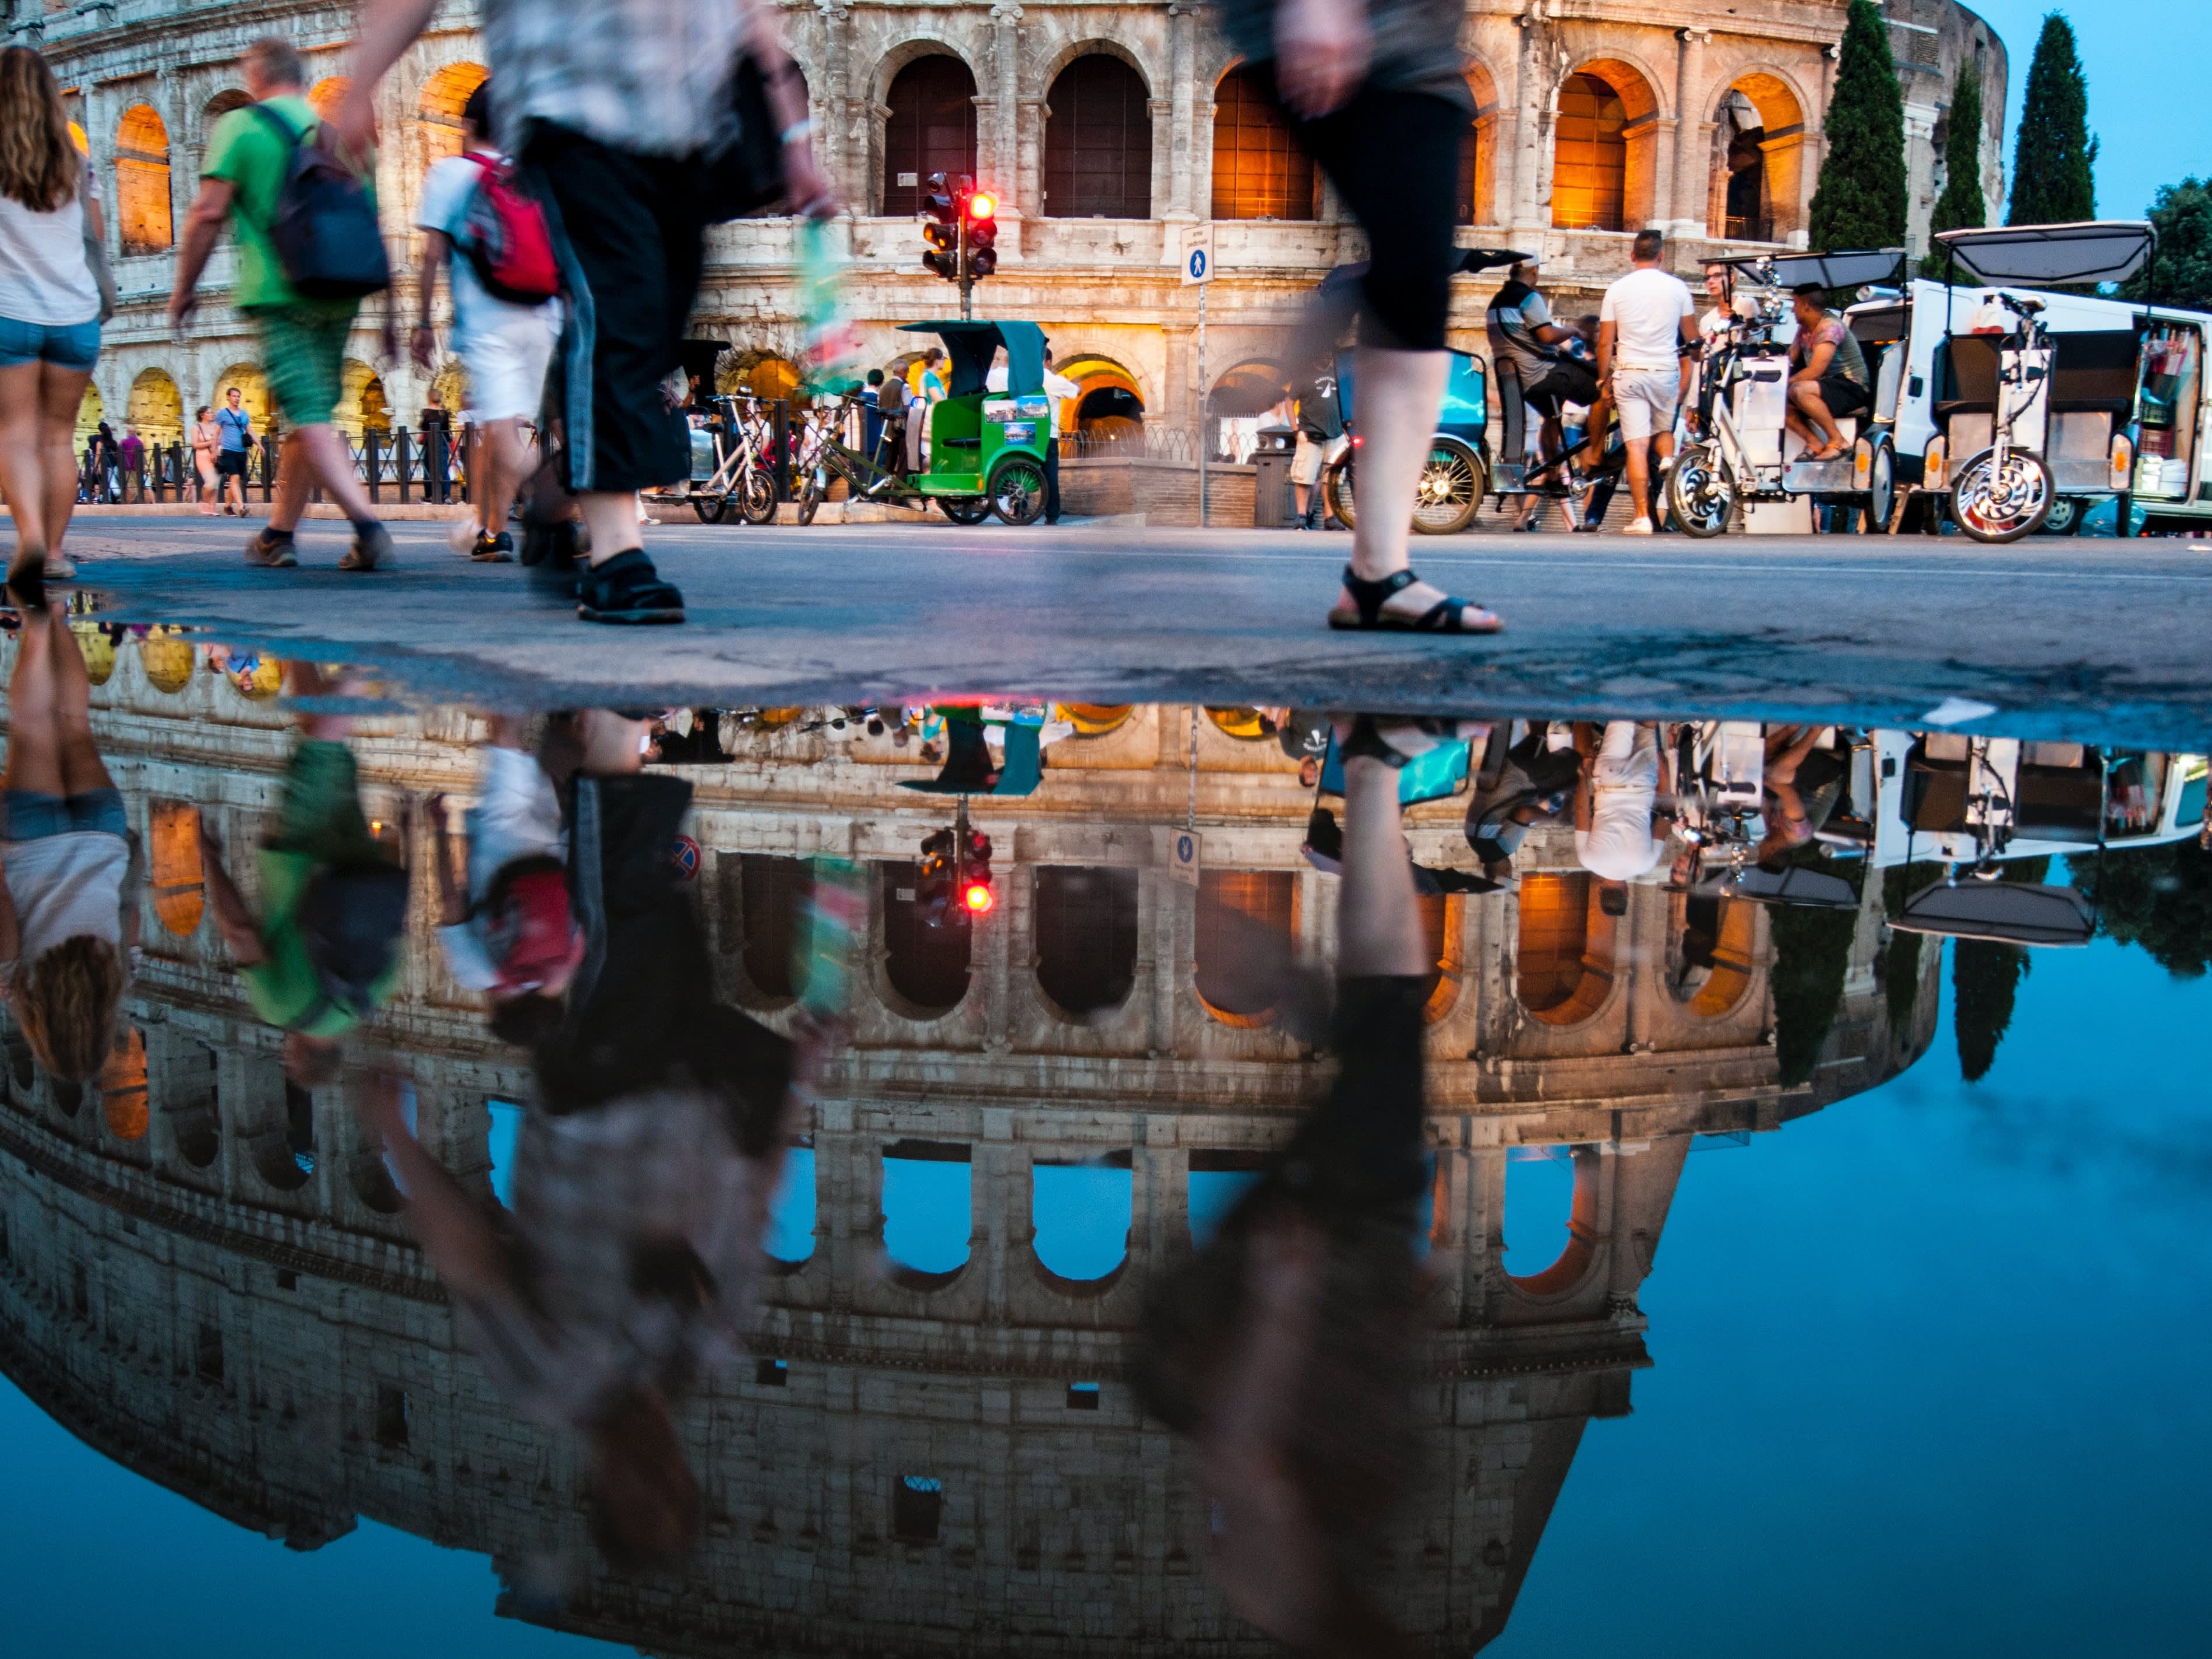 A picture of the reflection of the colosseum Rome with people walking across the frame